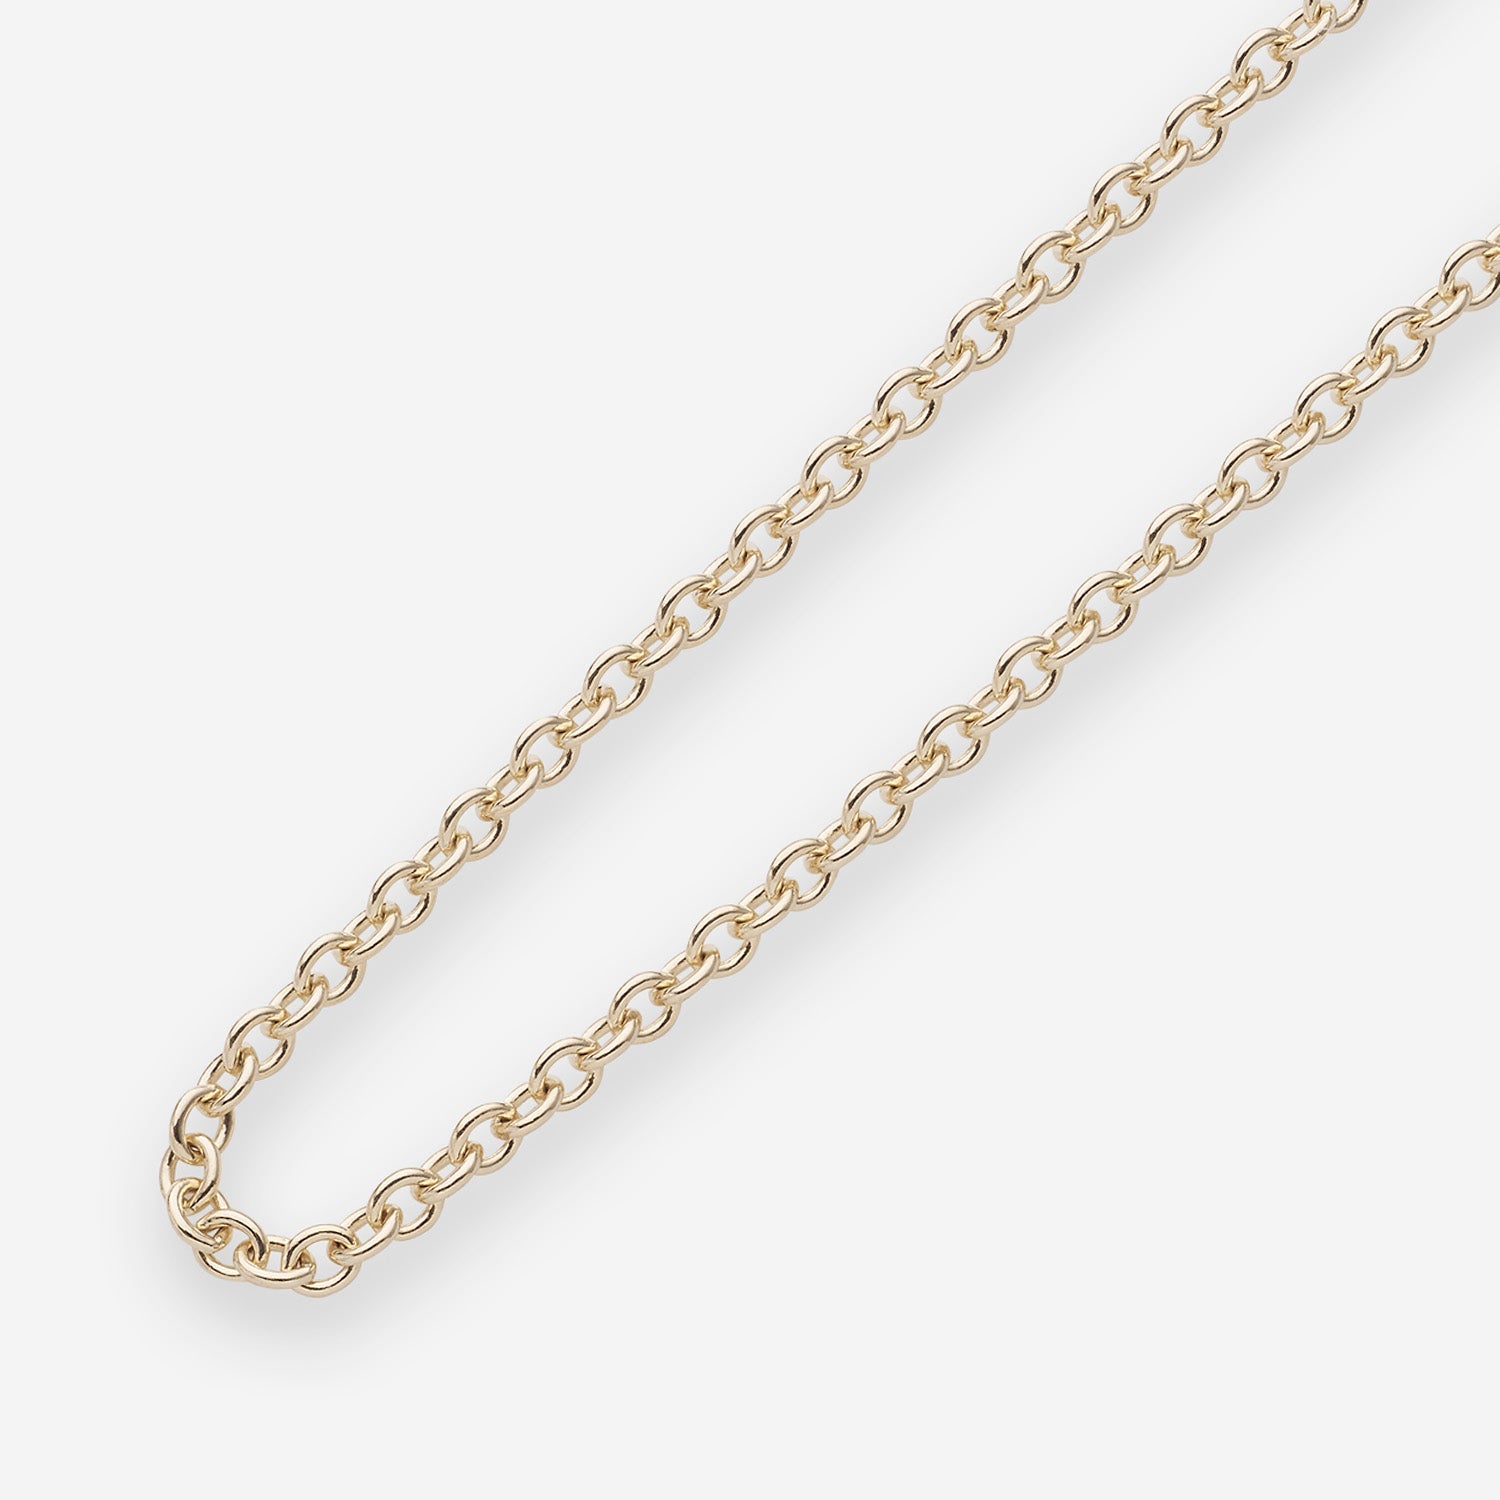 886 Royal Mint Necklaces 886 Trace Chain in 18ct Yellow Gold